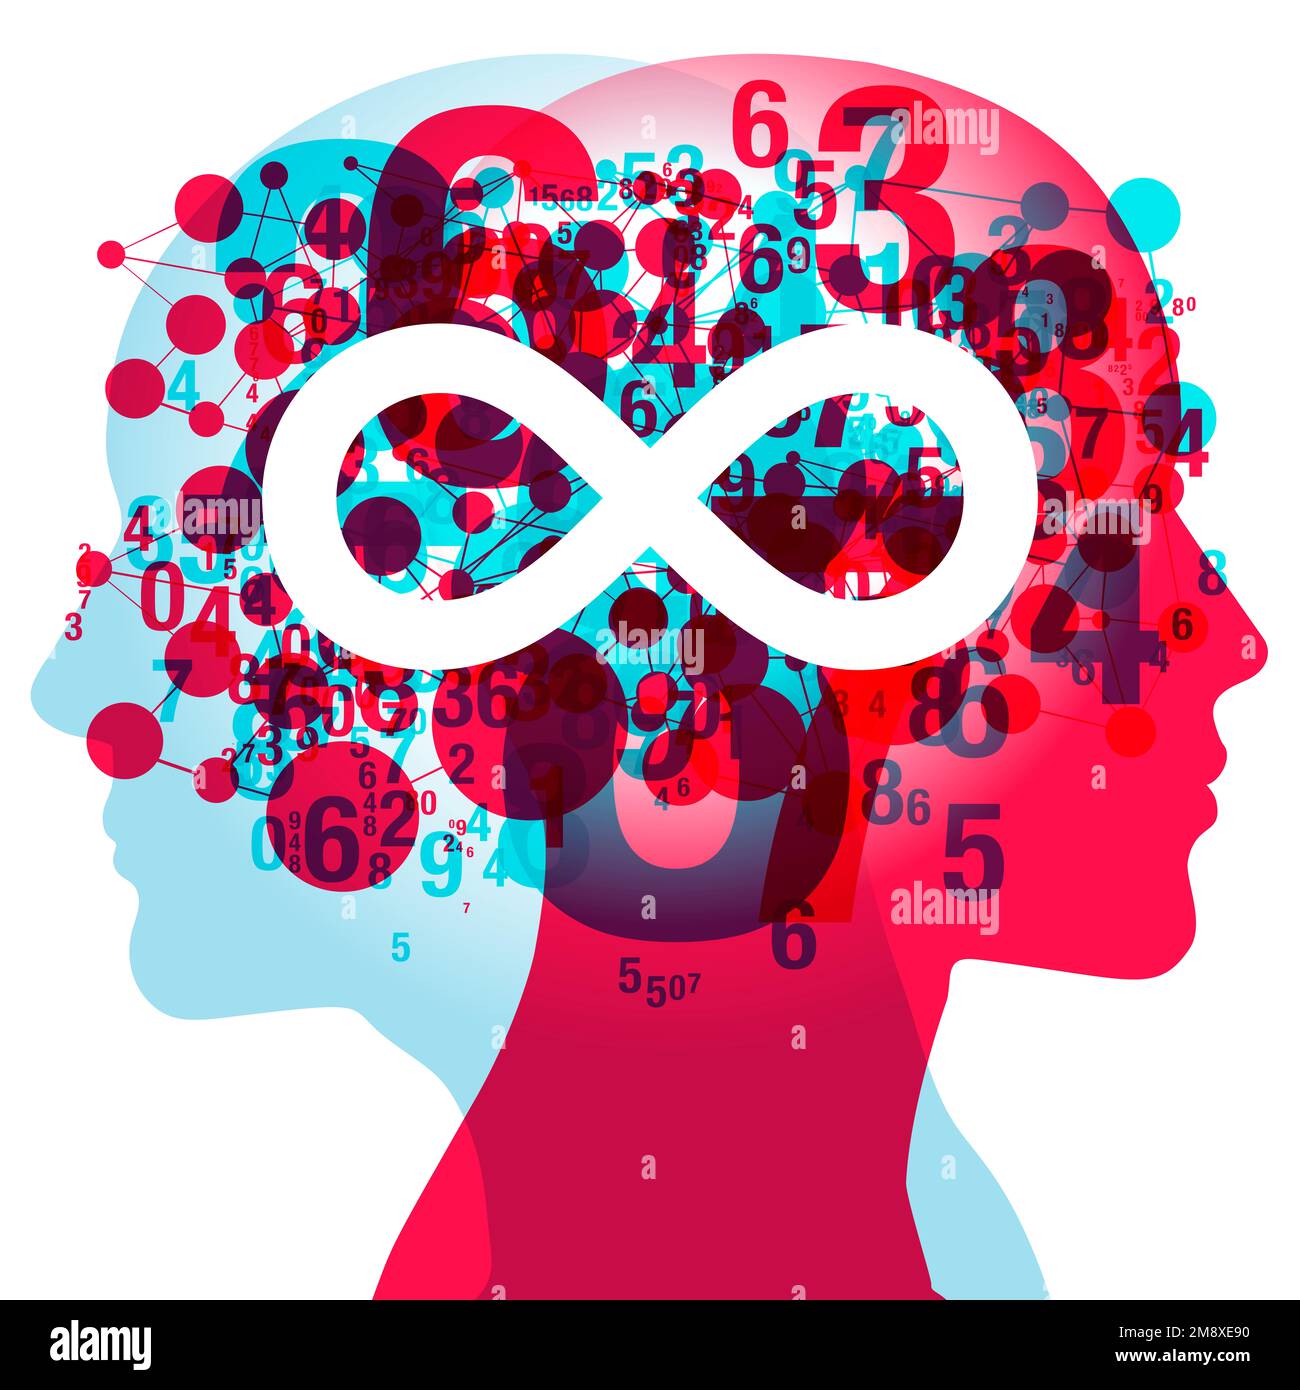 2 figures side silhouettes overlaid with semi-transparent numerals and line connected shapes. Centrally placed is a large white “Infinity” symbol. Stock Photo